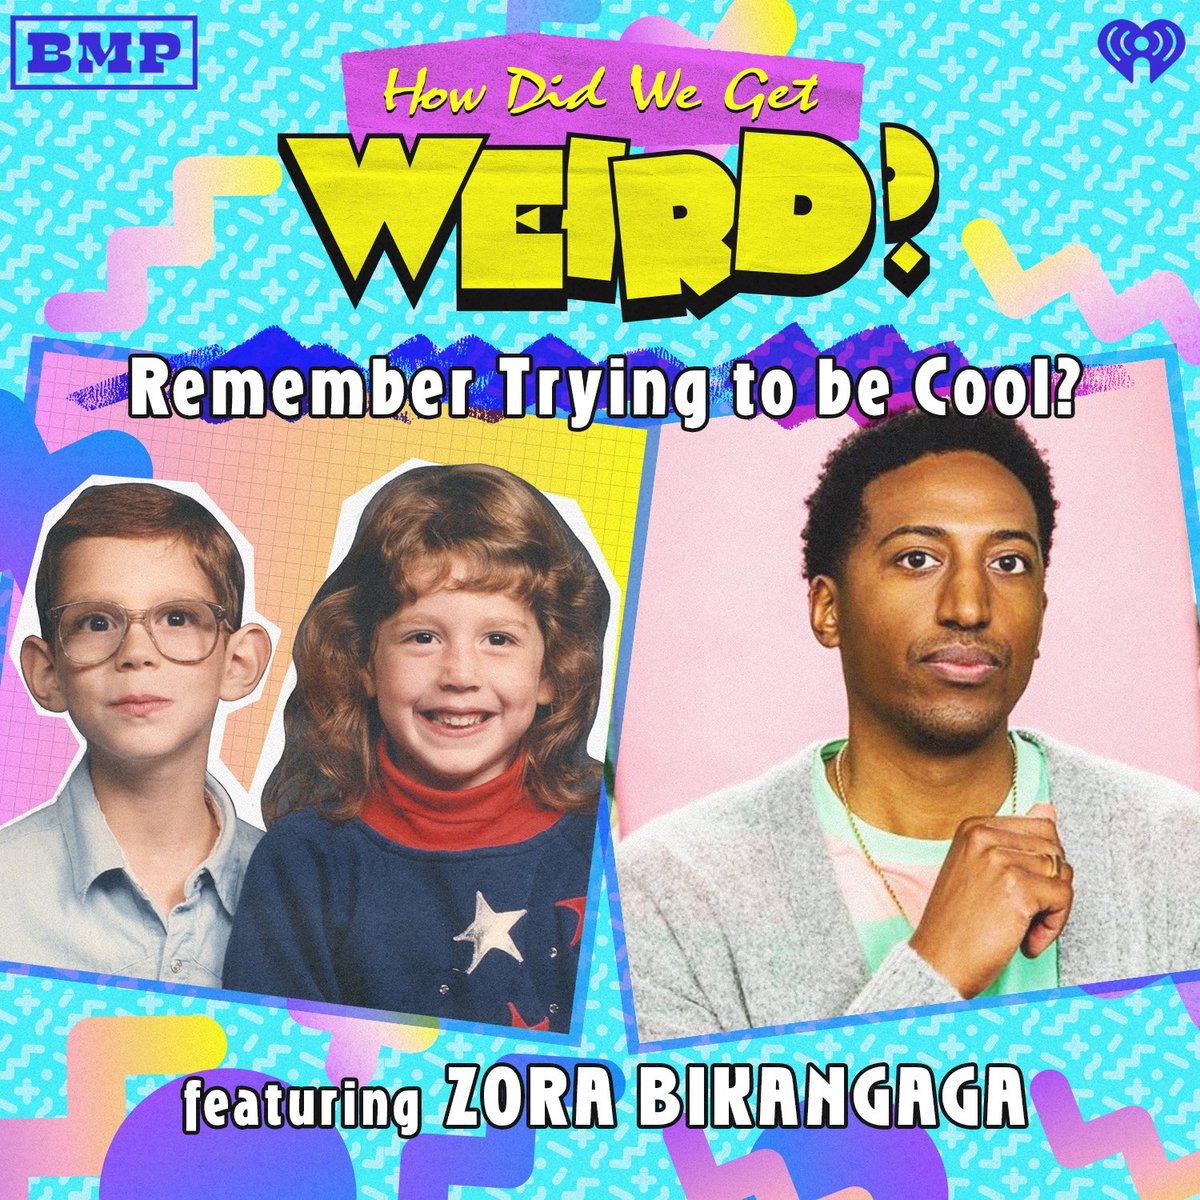 This week @jonahmbayer and I are thrilled to welcome our friend the hilarious delight Zora Bikangaga to talk about trying to be cool as kids, and whether our kid selves would think we’re cool today (we have no bedtimes and can eat candy whenevs, so…) Be cool and check it out!!